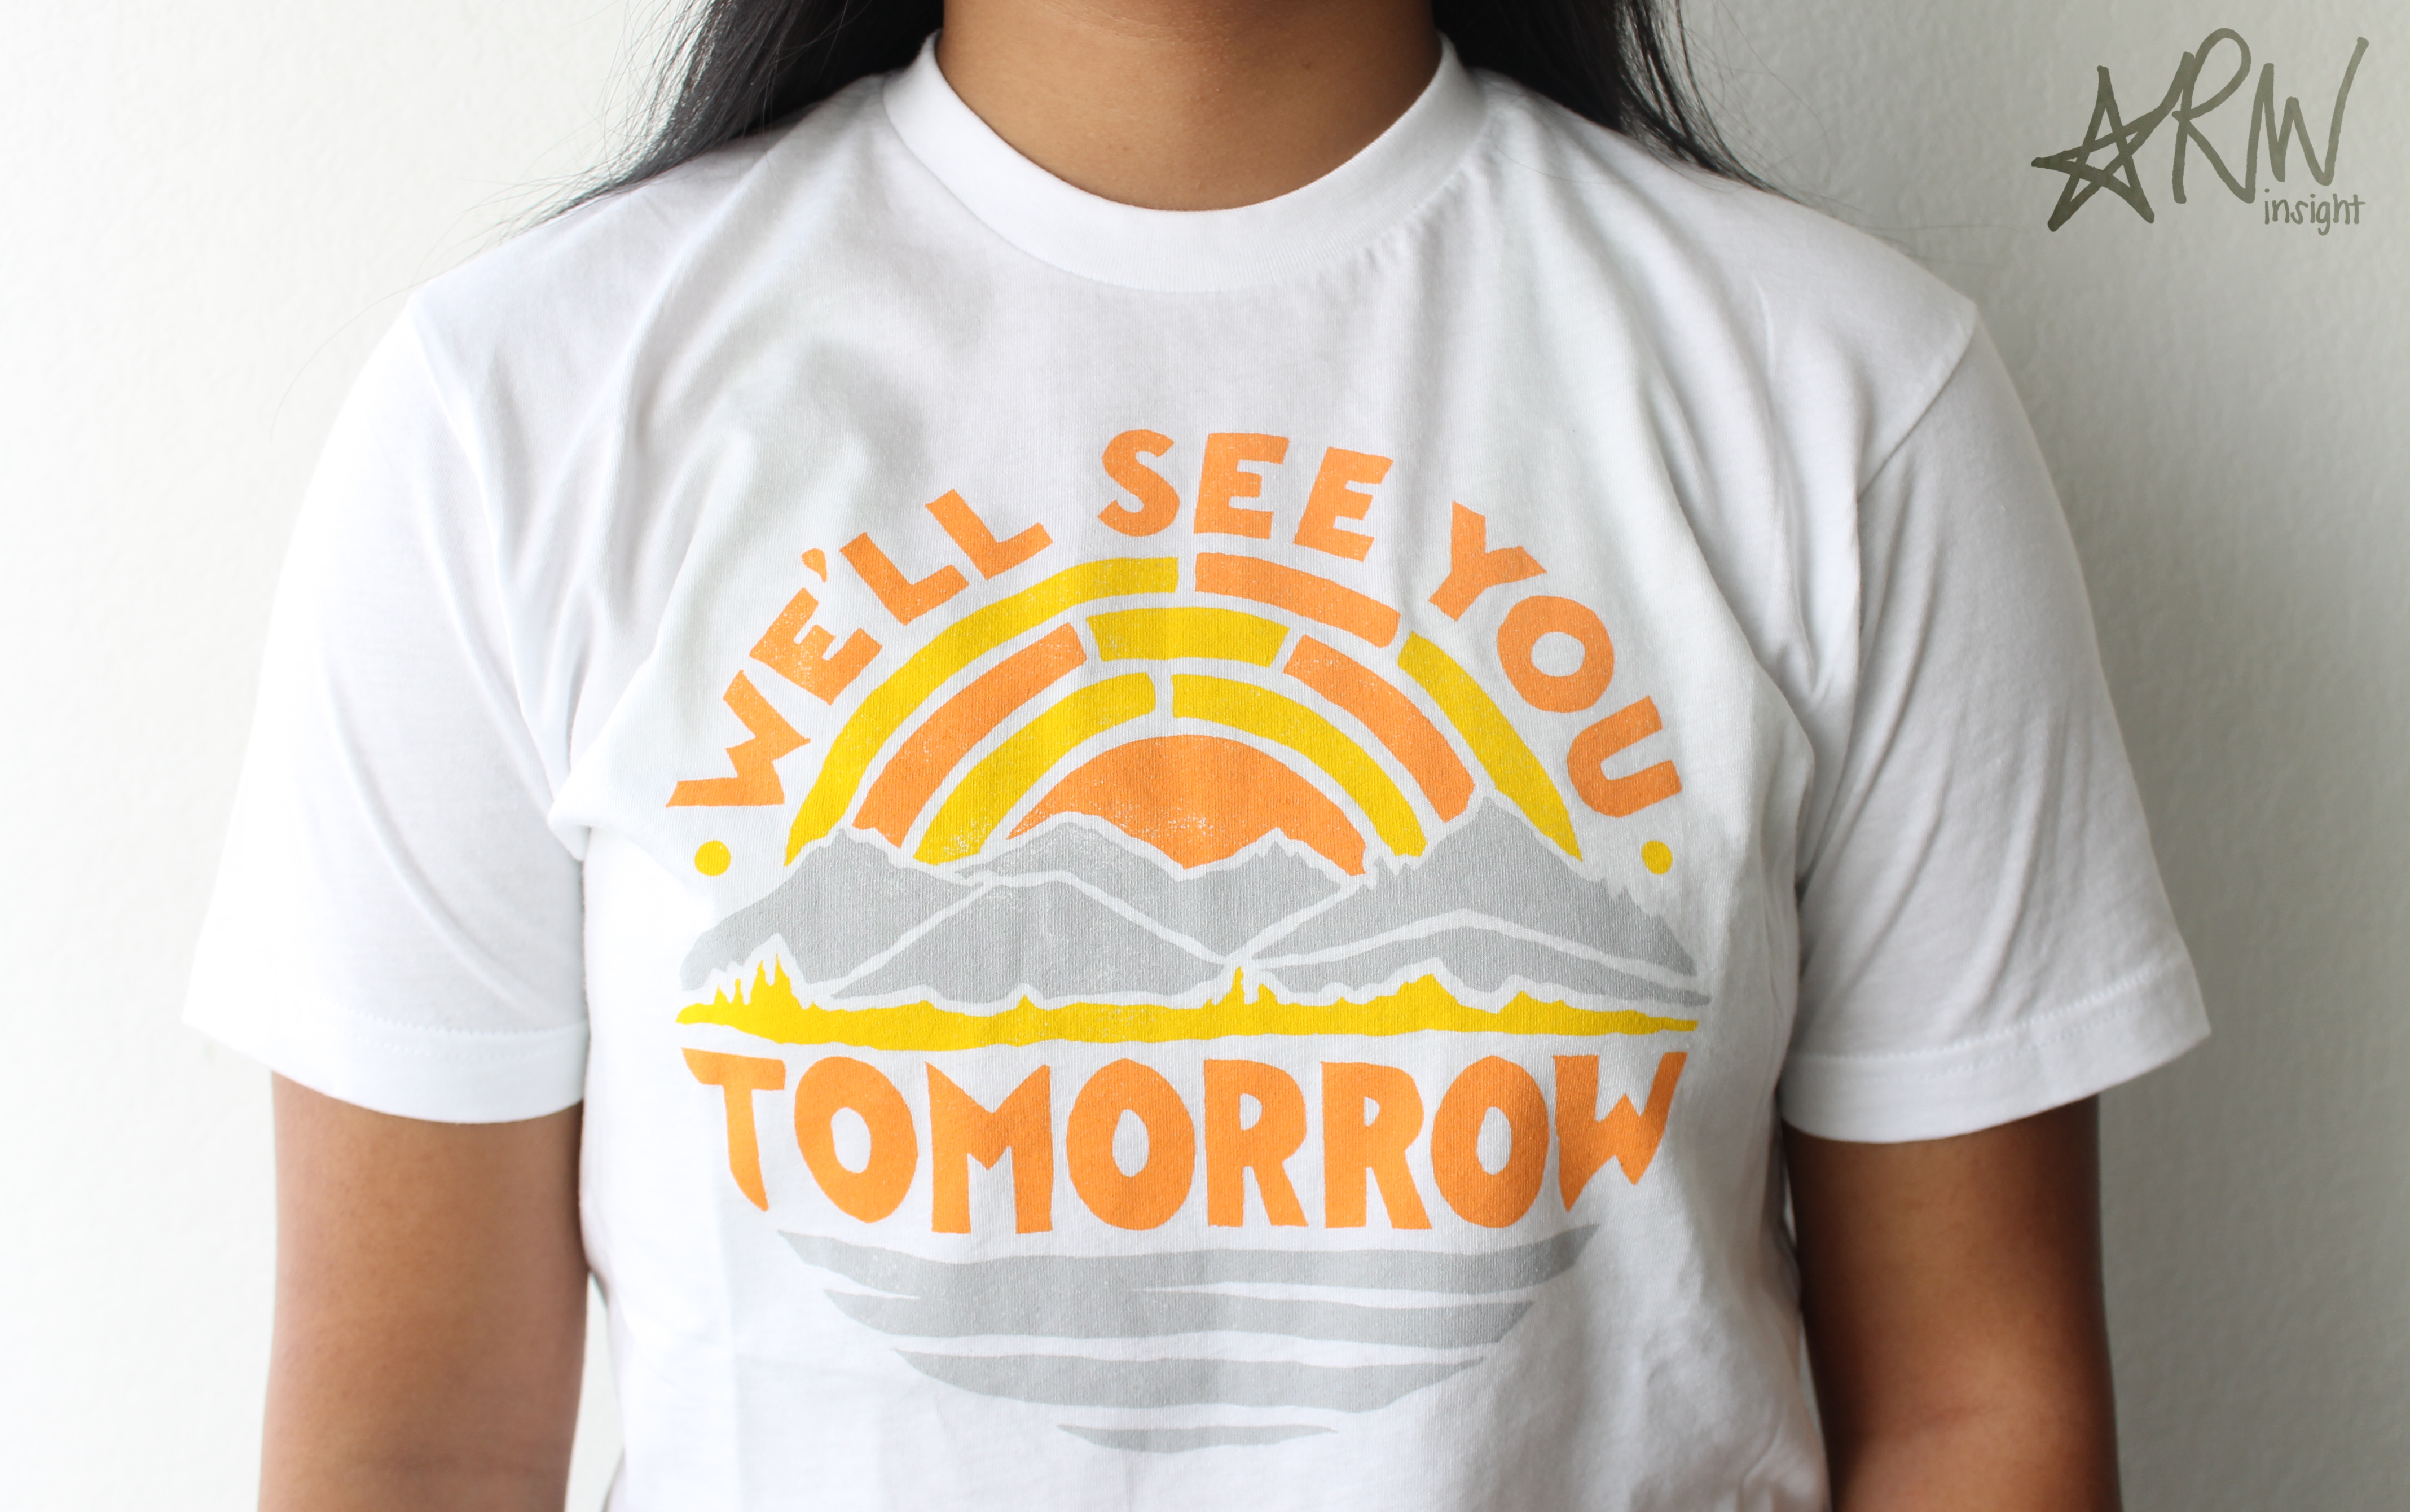 World Suicide Prevention Day 2015: “You will see me tomorrow”